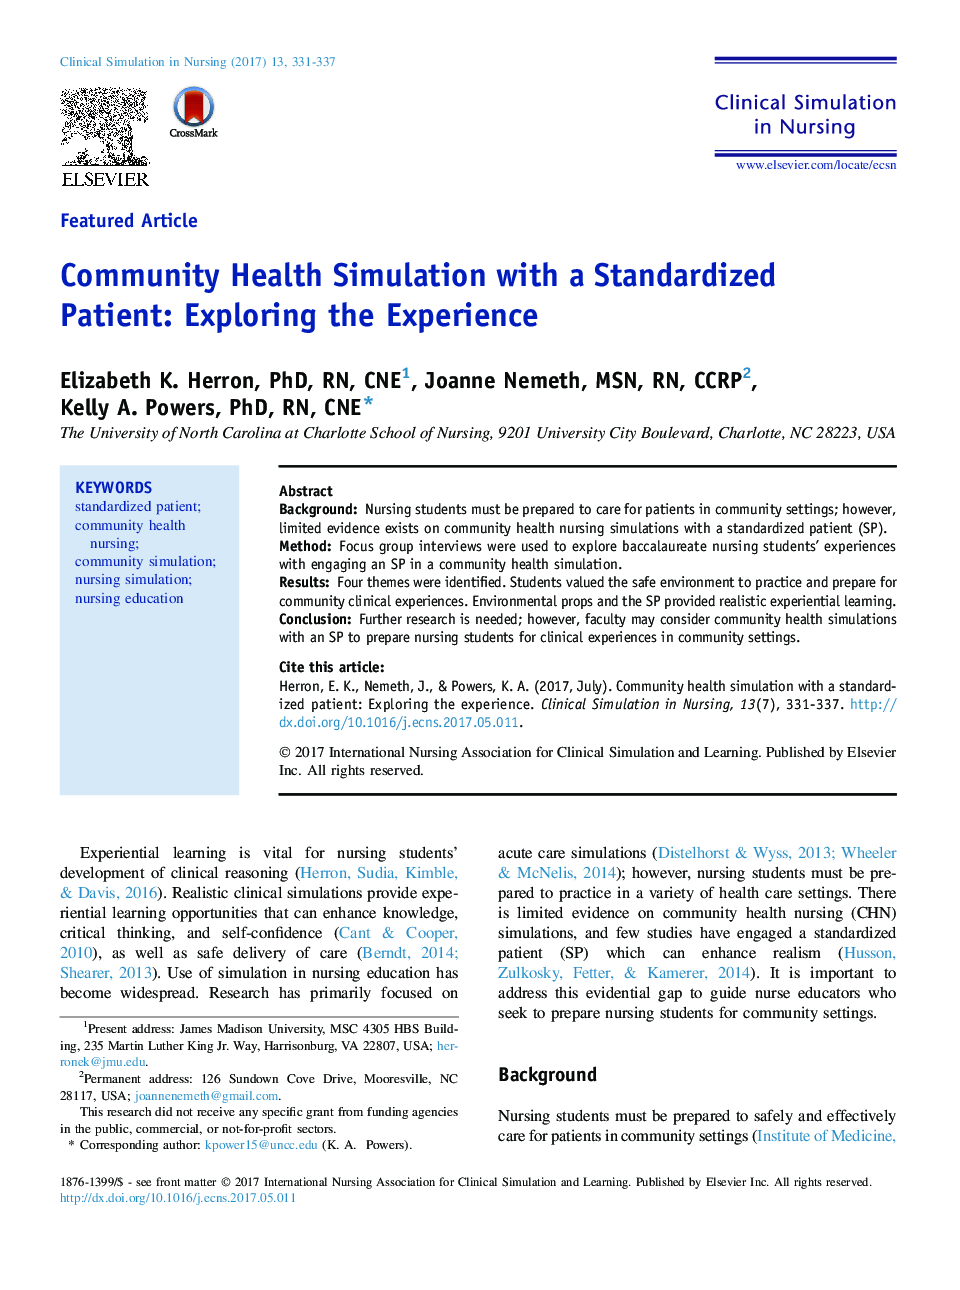 Community Health Simulation with a Standardized Patient: Exploring the Experience